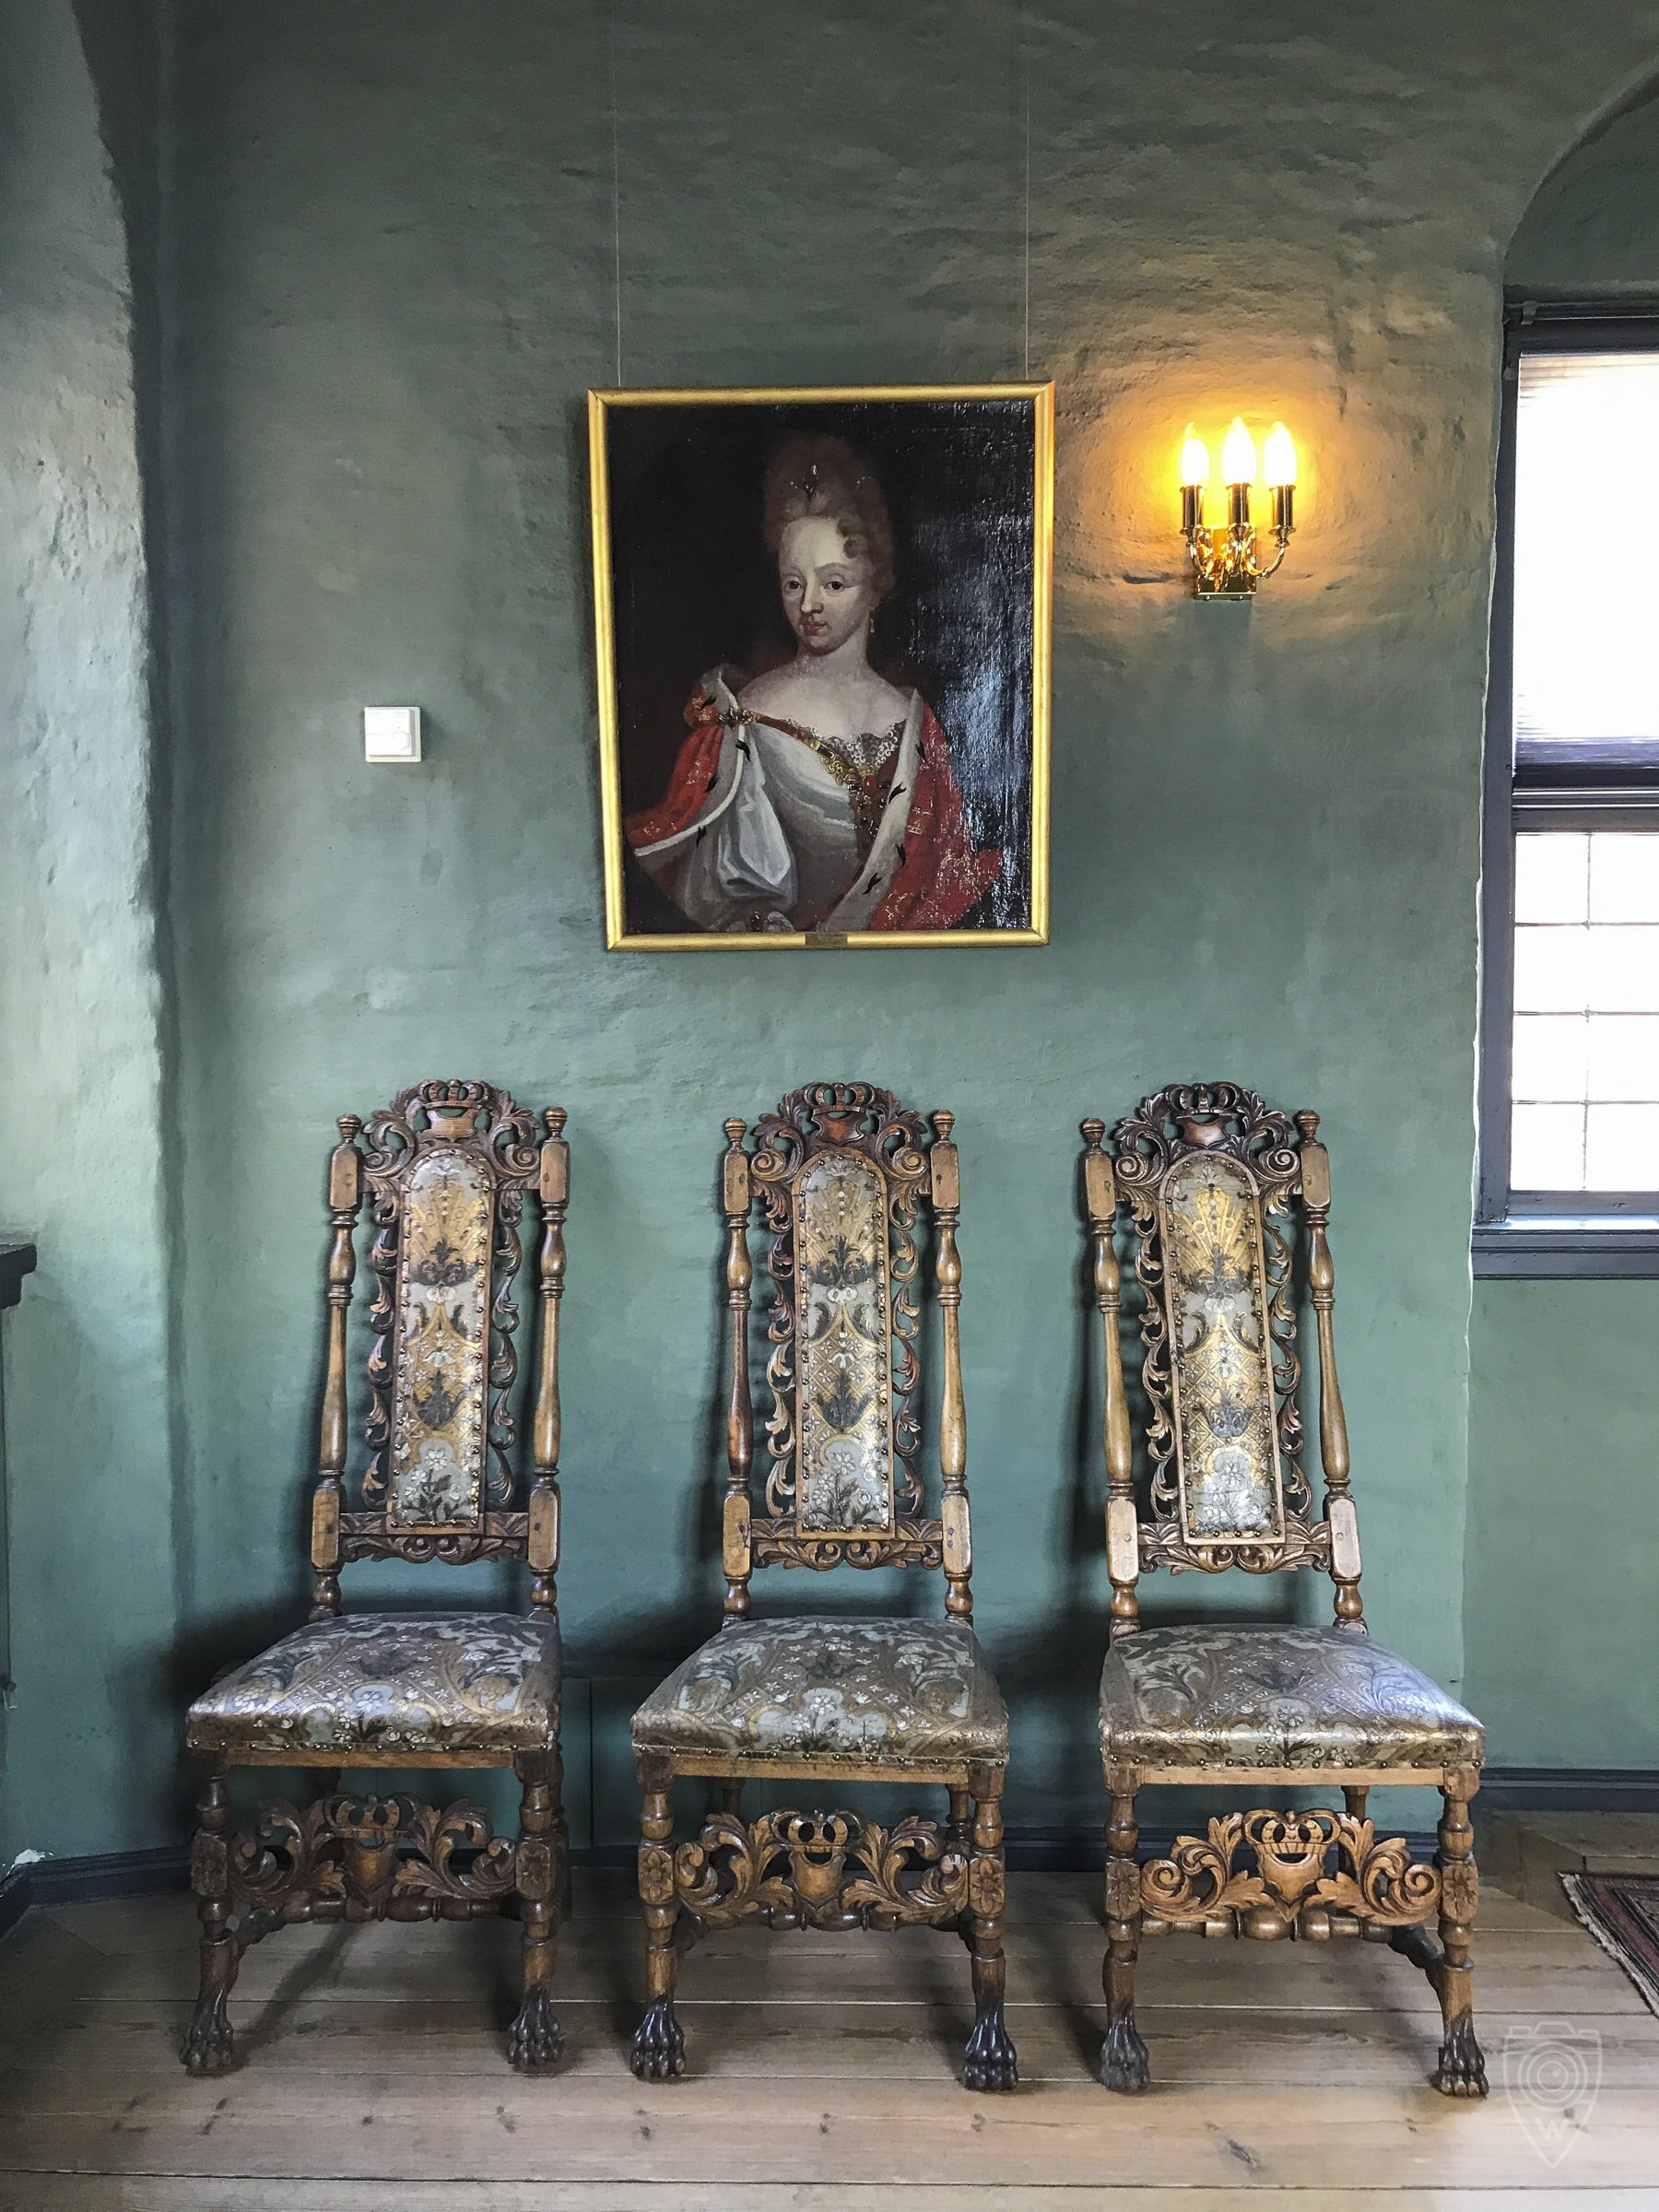 guide-to-oslo-akershus-castle-chairs.jpg